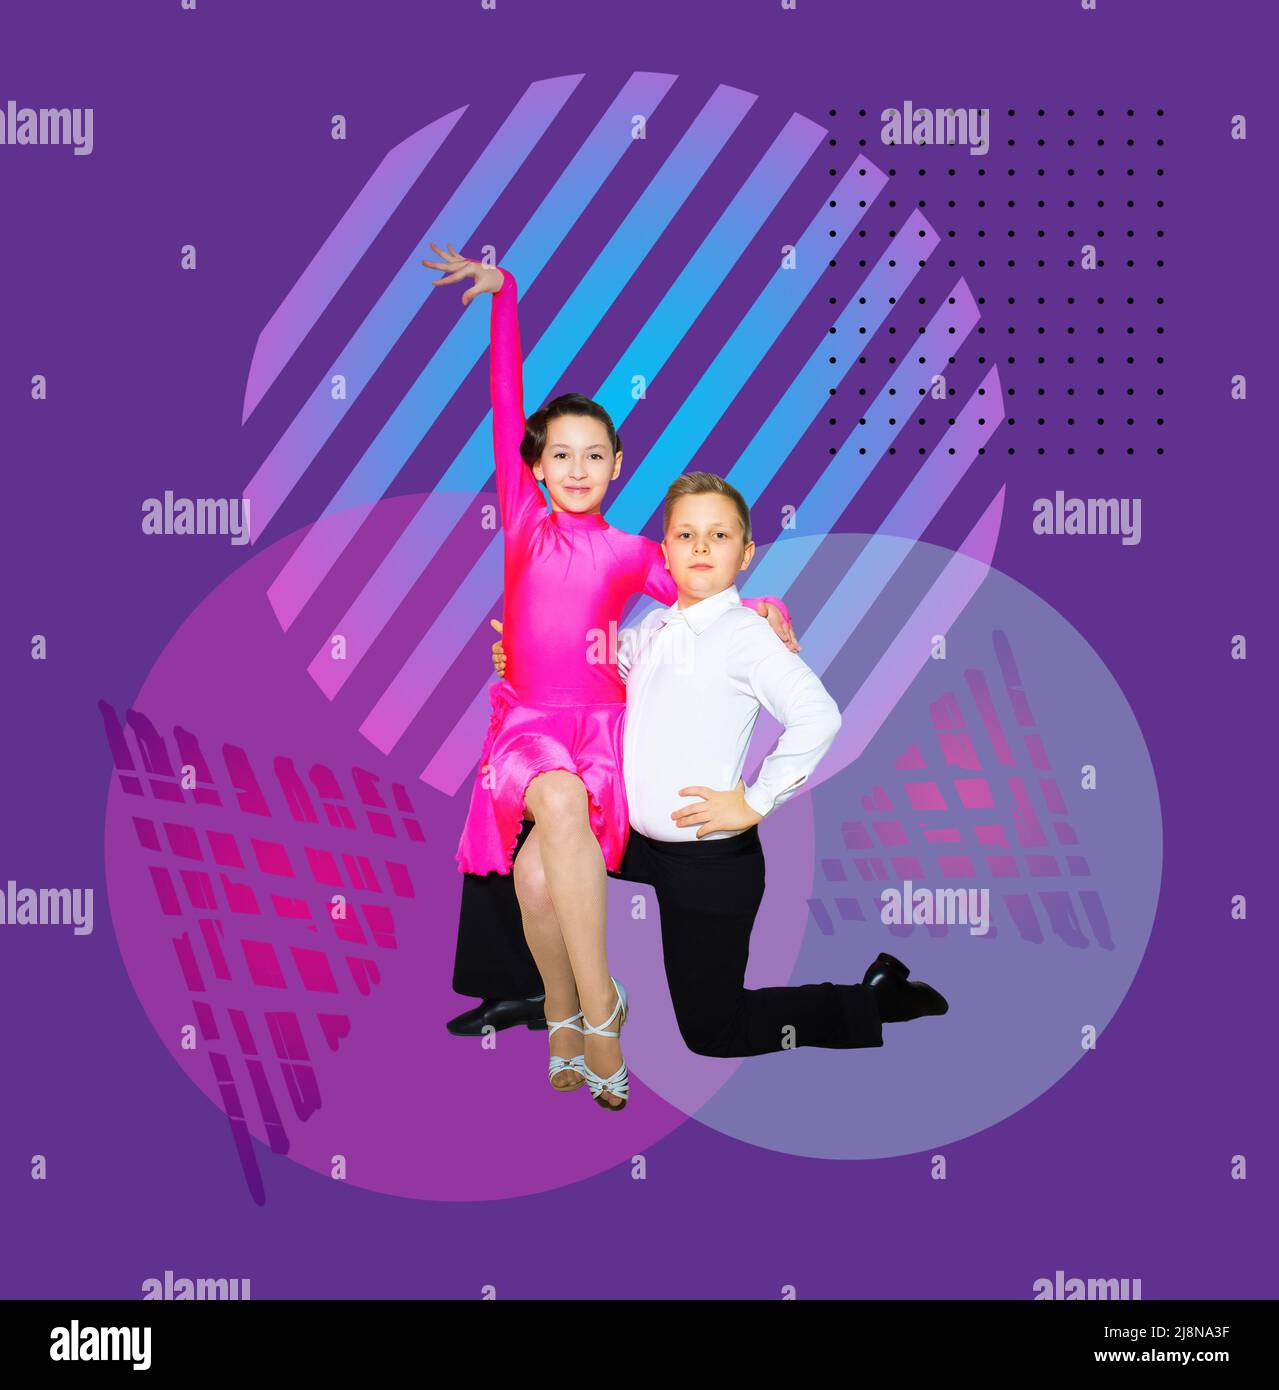 The young boy and girl posing at dance studio on abstract art design. The ballroom dancing concept Stock Photo